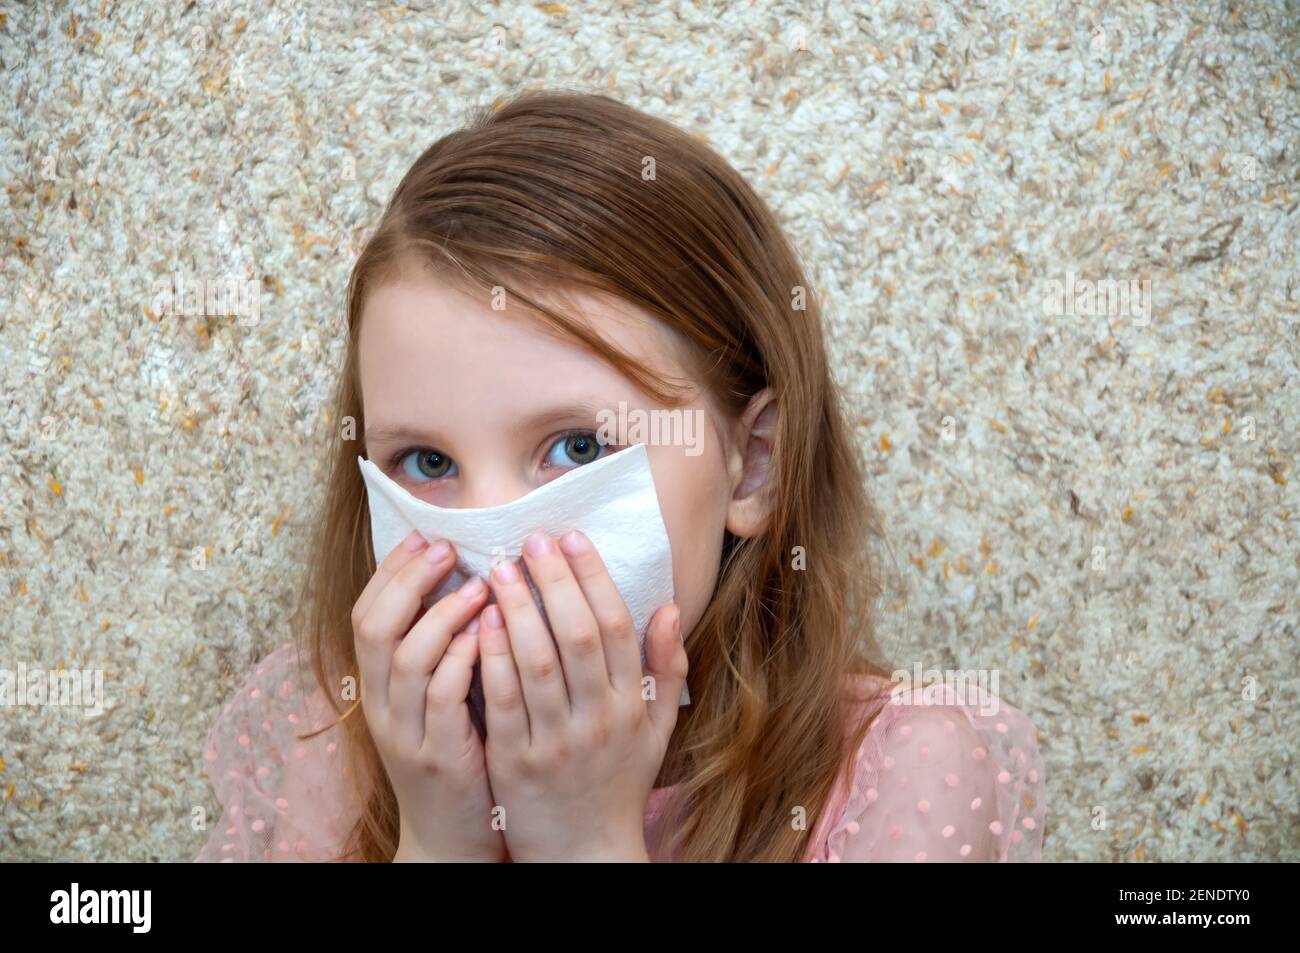 Child girl with a cold virus wipes his nose from a runny nose Stock Photo